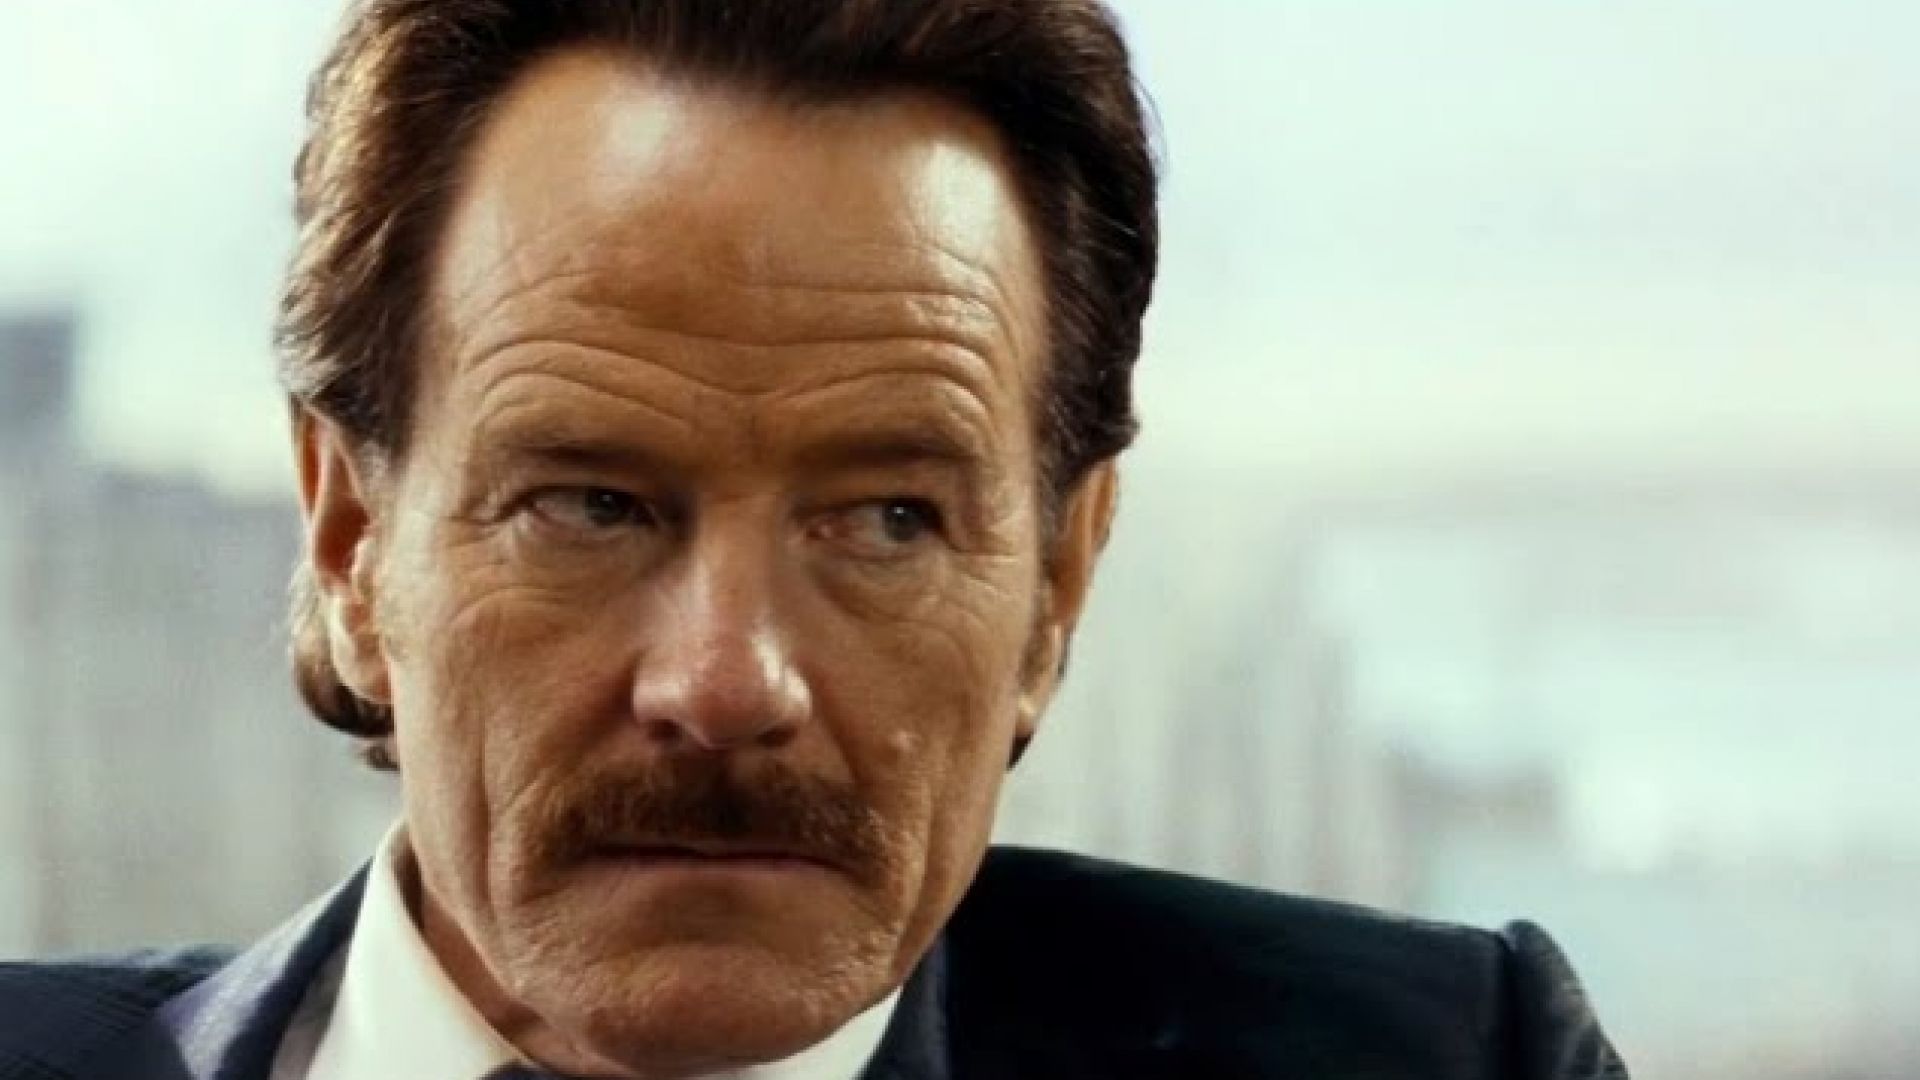 Bryan Cranston joins the other side of the drug war in the t